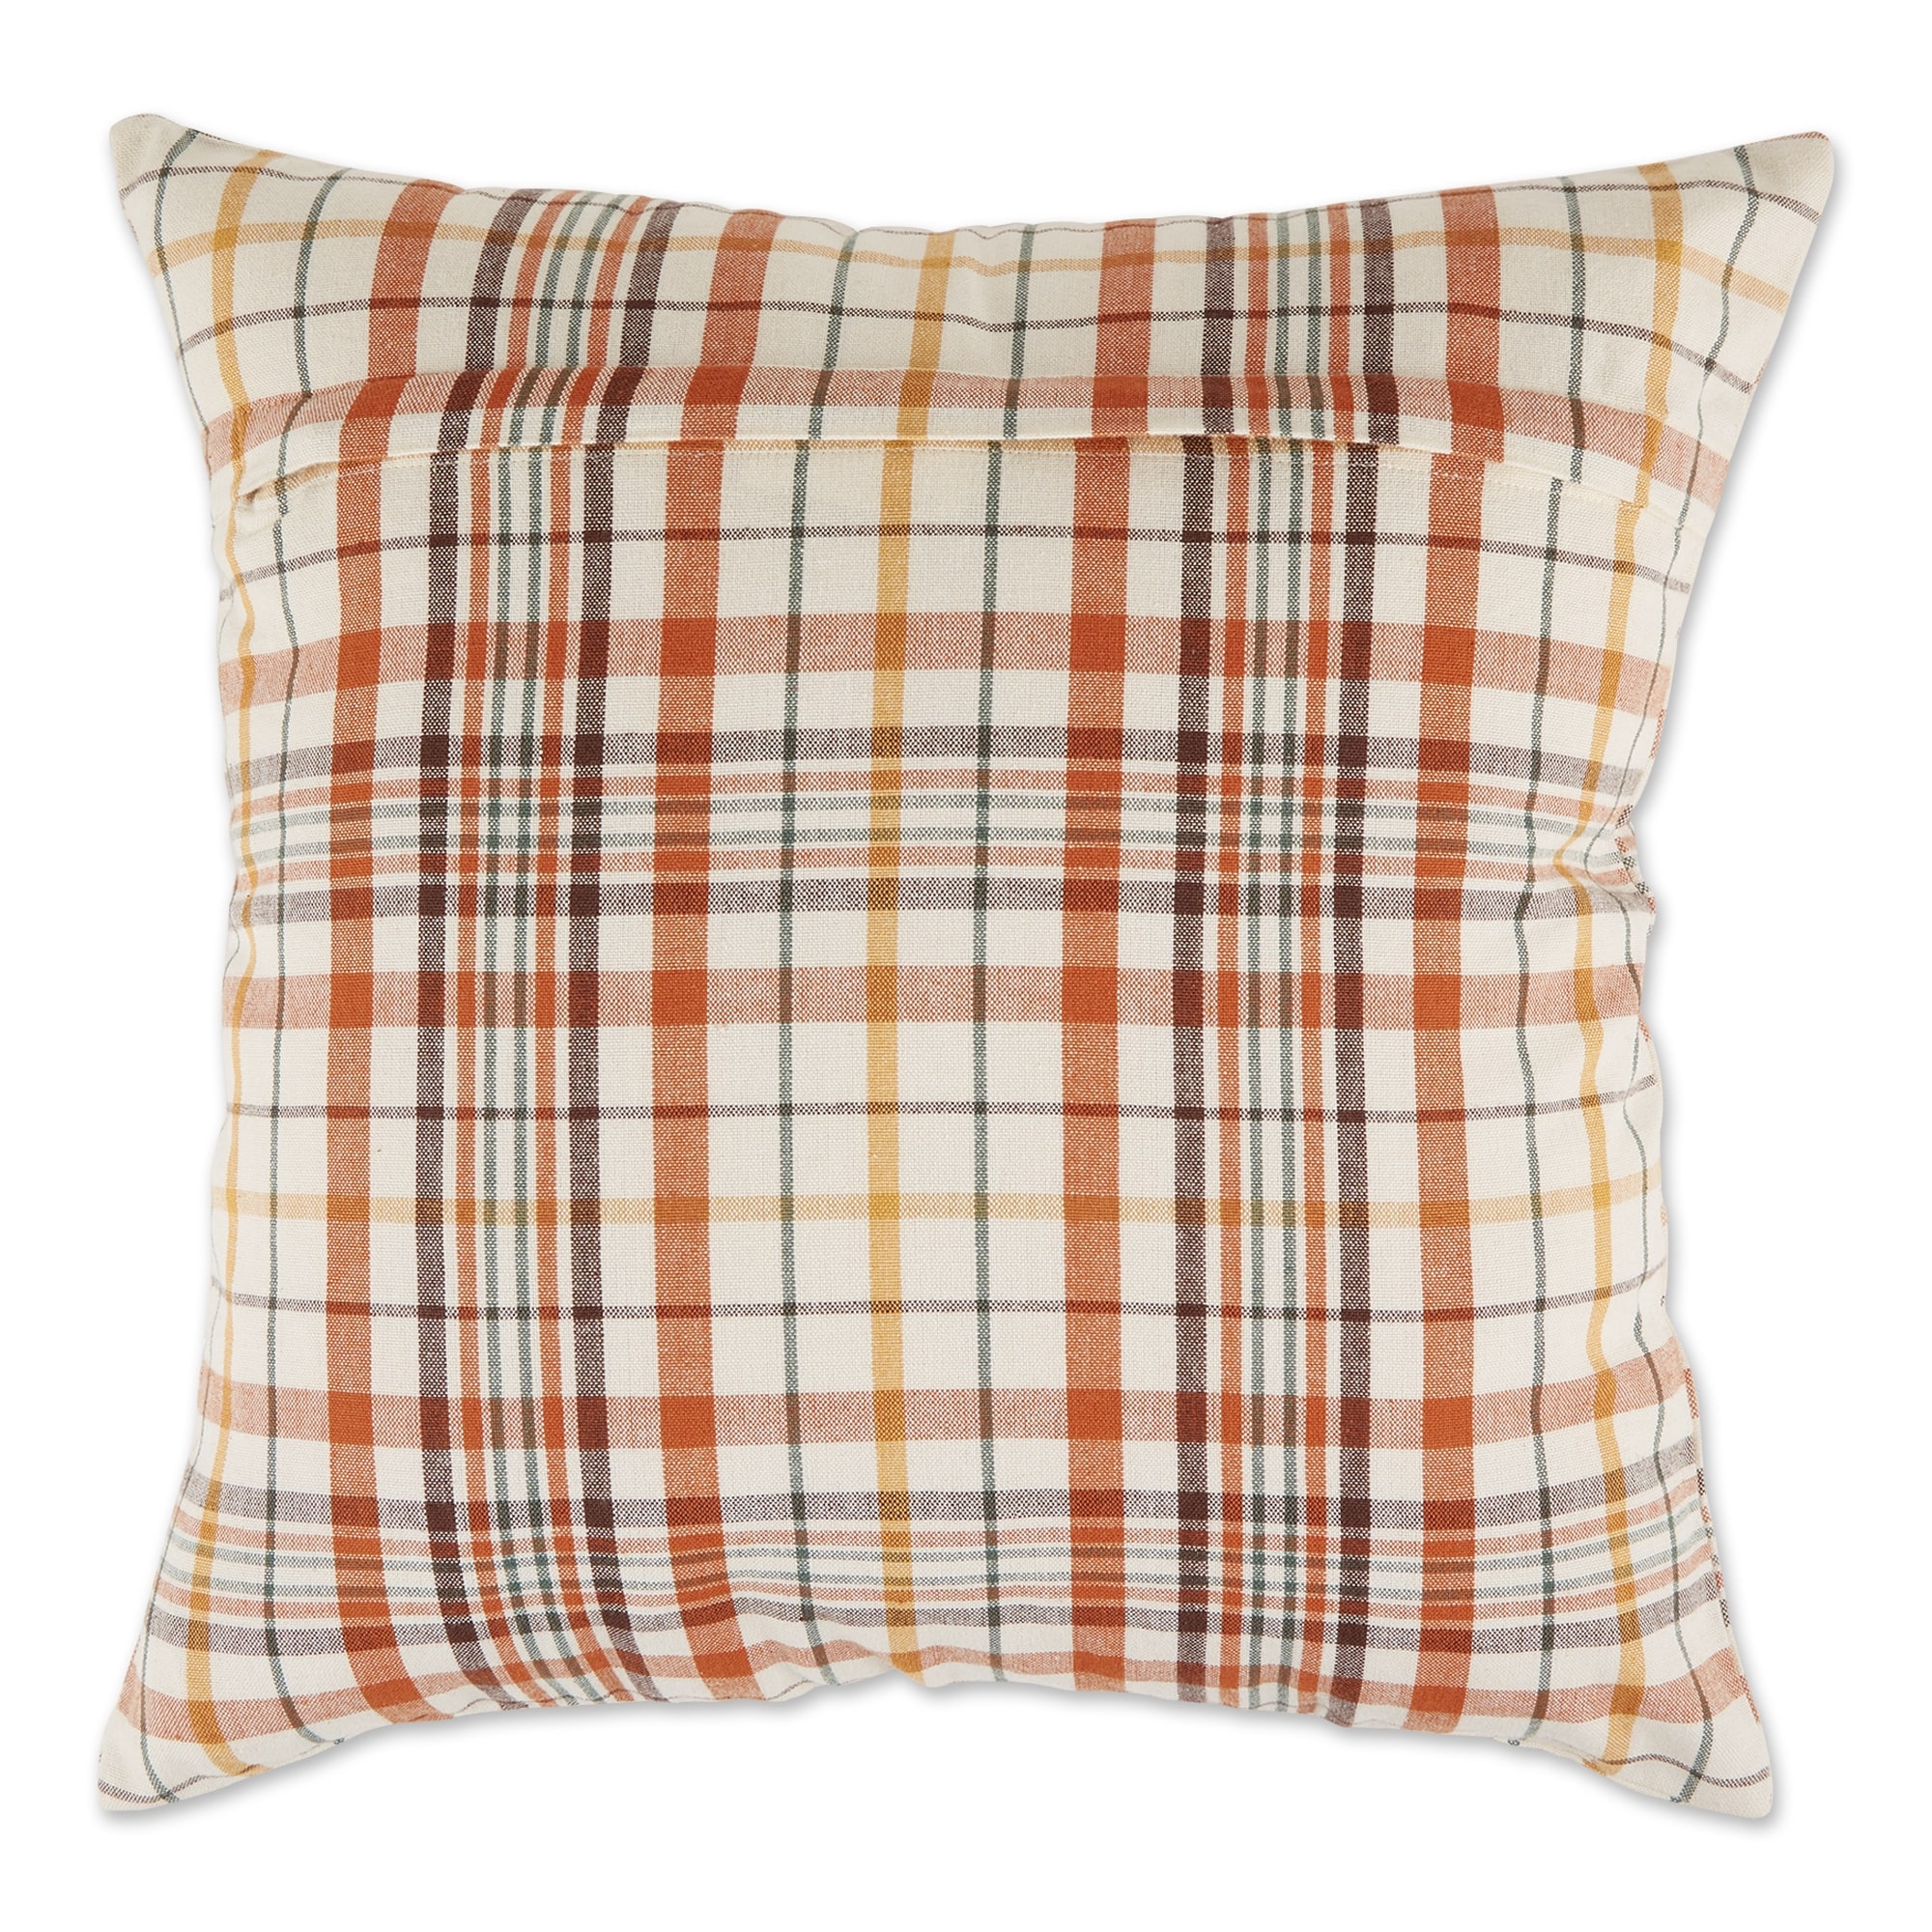 https://ak1.ostkcdn.com/images/products/is/images/direct/1a1f88cb4b42b713ef7cdf39a7d03bd777efe277/DII-Asst-Fall-Pillow-Cover-18x18-inch.jpg